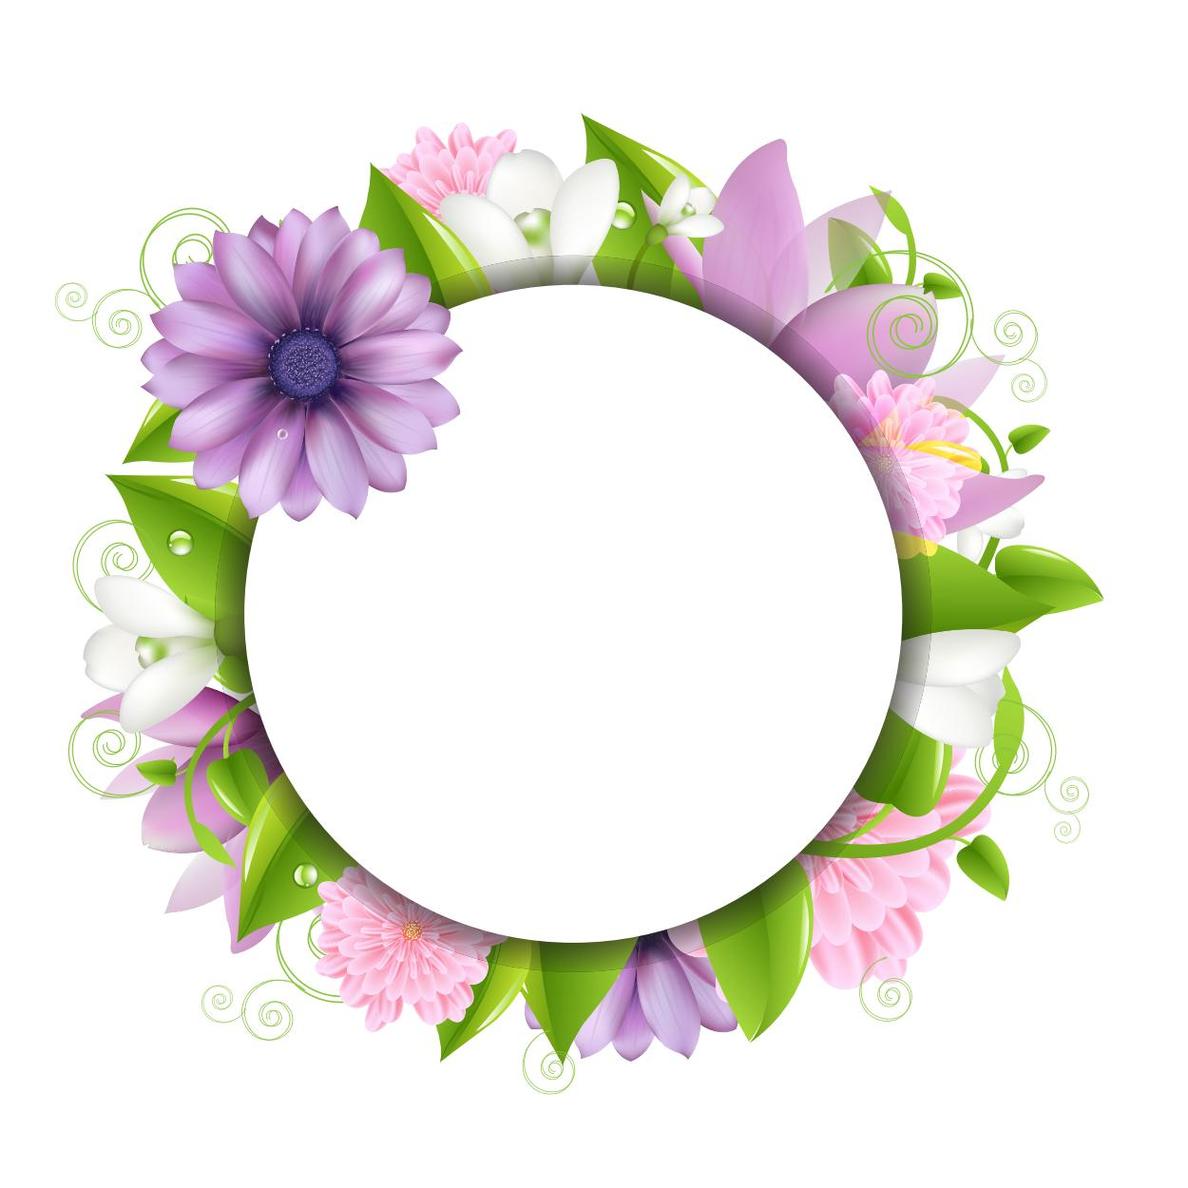 Background Frame Flower Clipart - Free to use Clip Art Resource